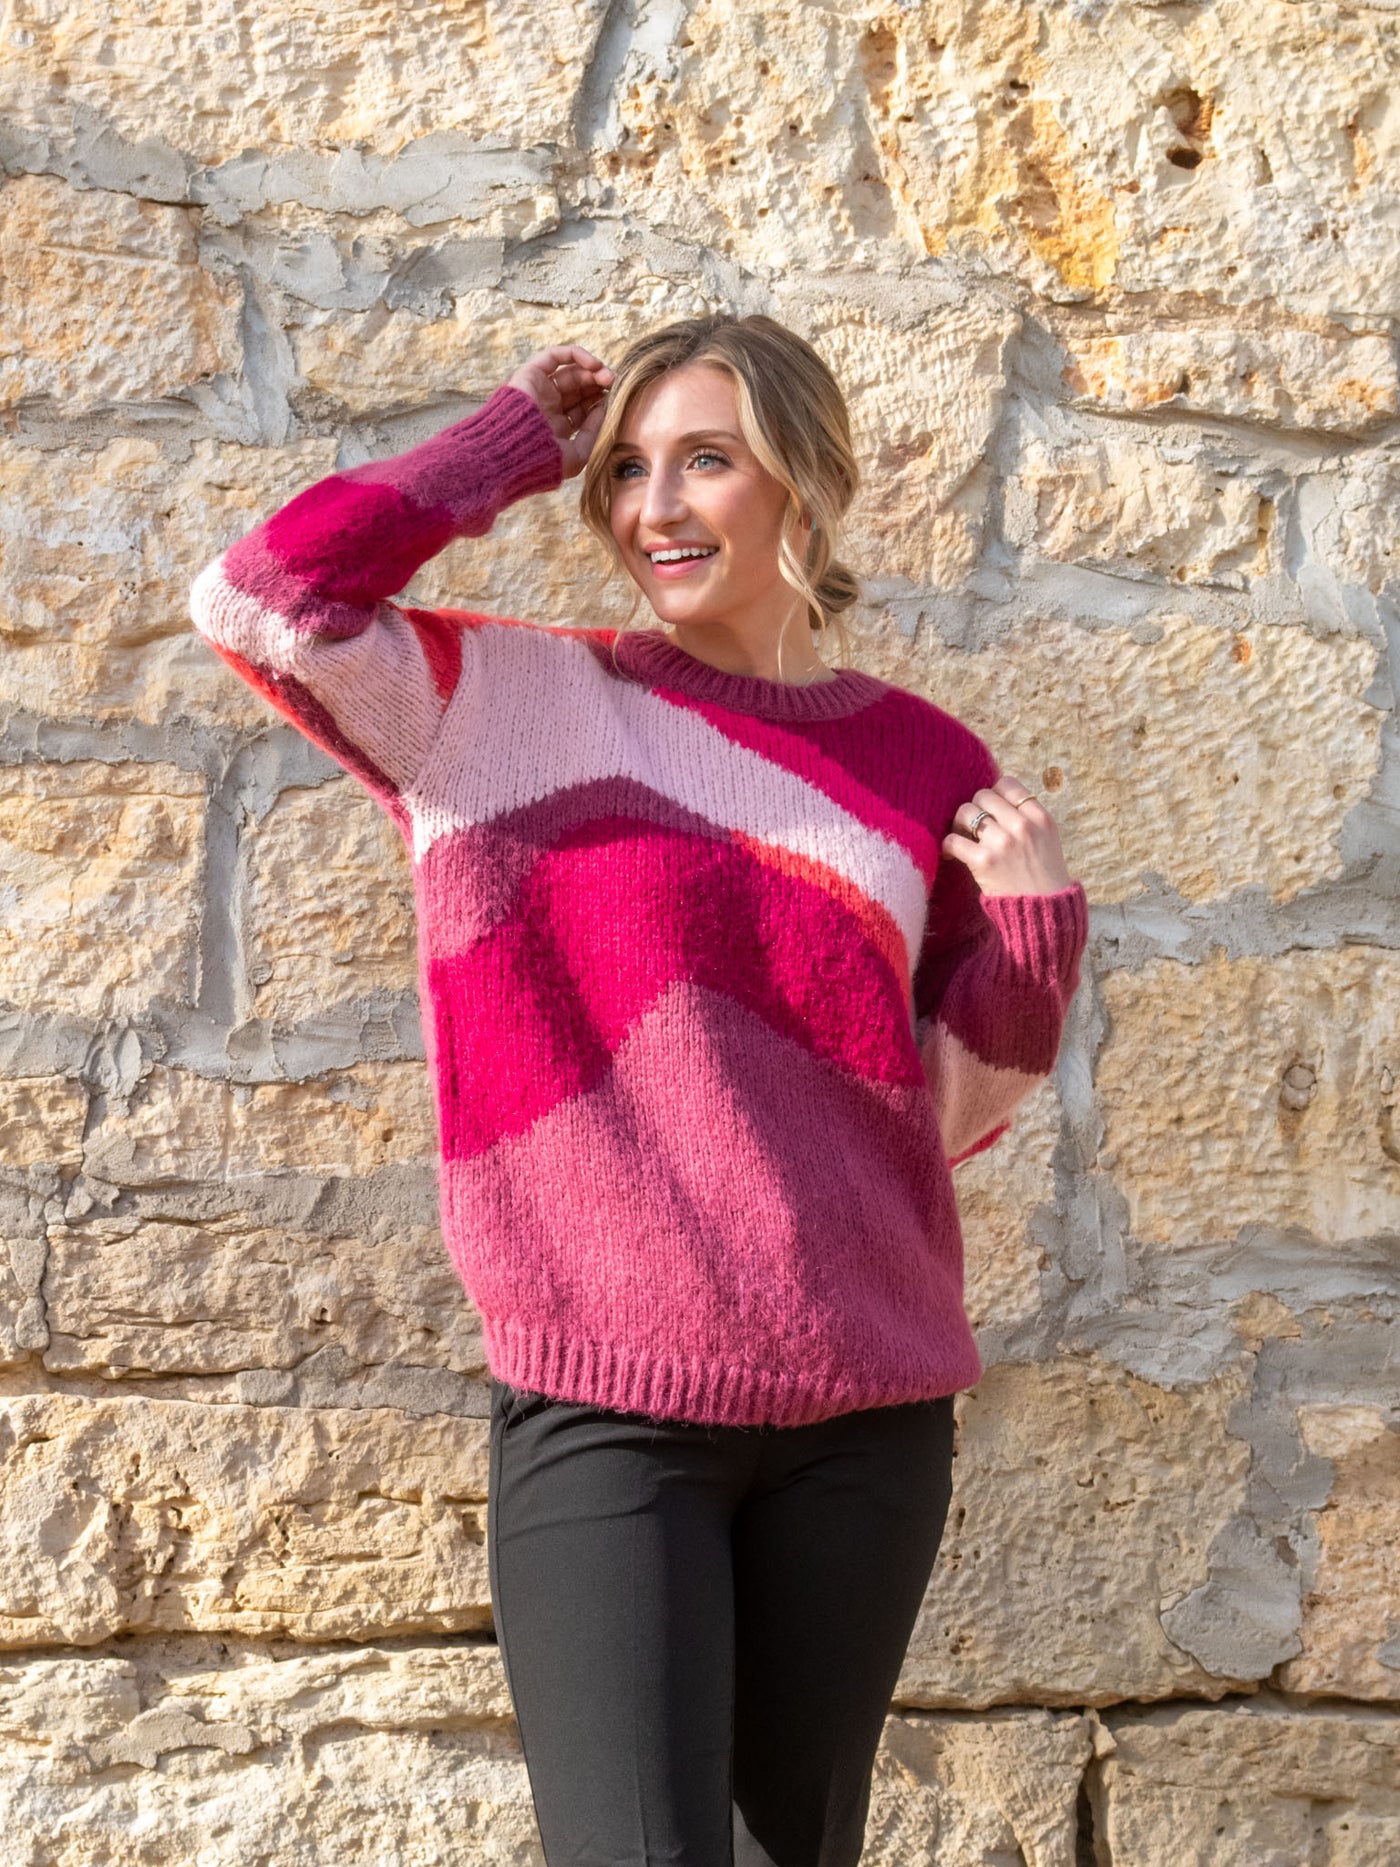 A model wearing a pink, orange, and purple printed crewneck sweater. The model has it paired with black slacks.